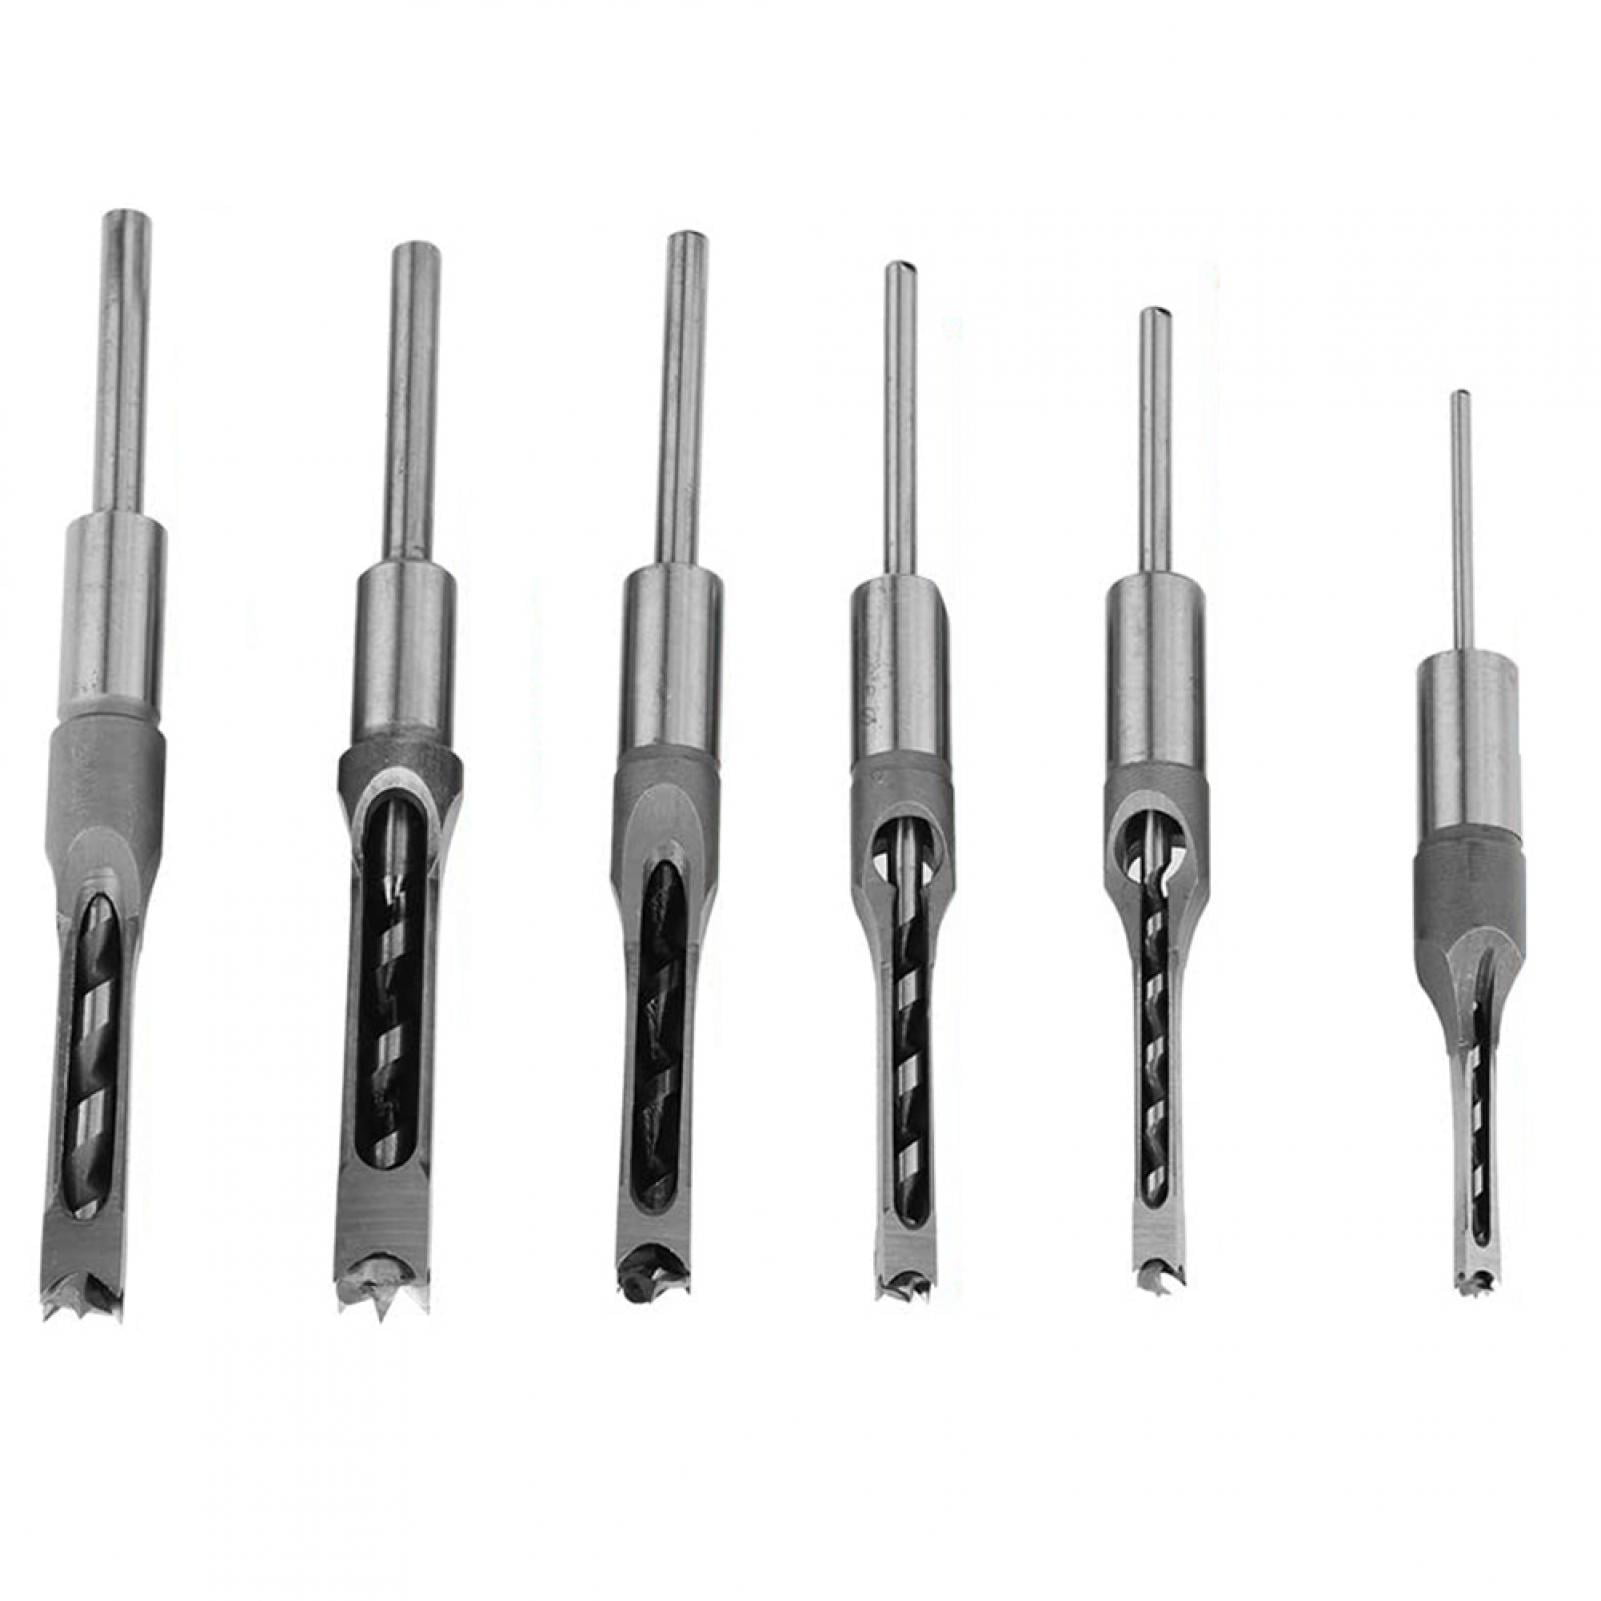 6pcs/set Woodworking Square Hole Drill Bits Tools Kit Auger Mortising Chisel 